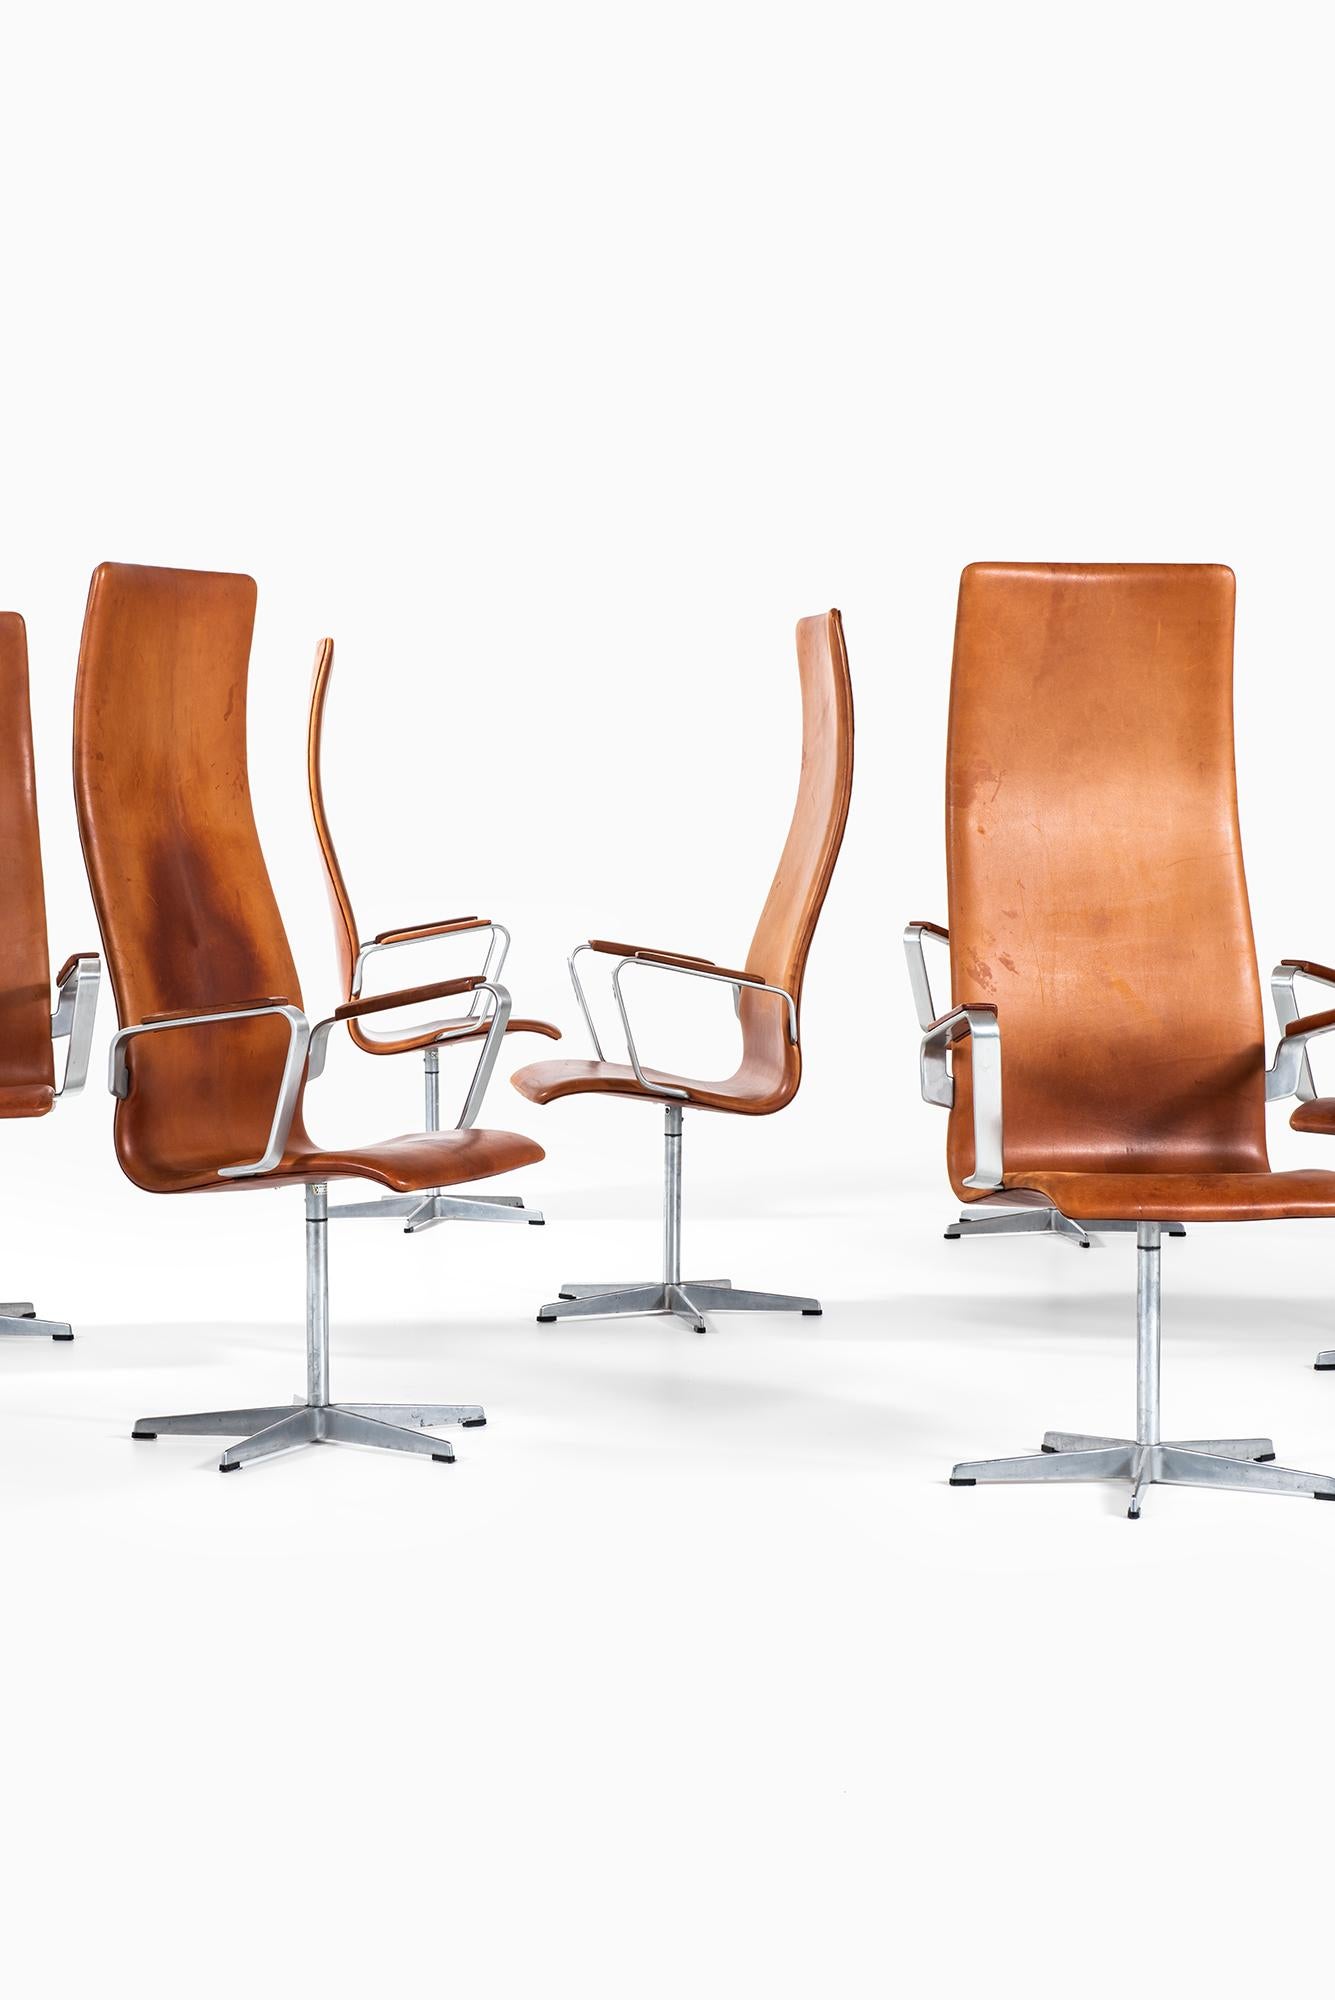 Rare set of Oxford high backed chairs model 3272 designed by Arne Jacobsen. Produced by Fritz Hansen in Denmark.